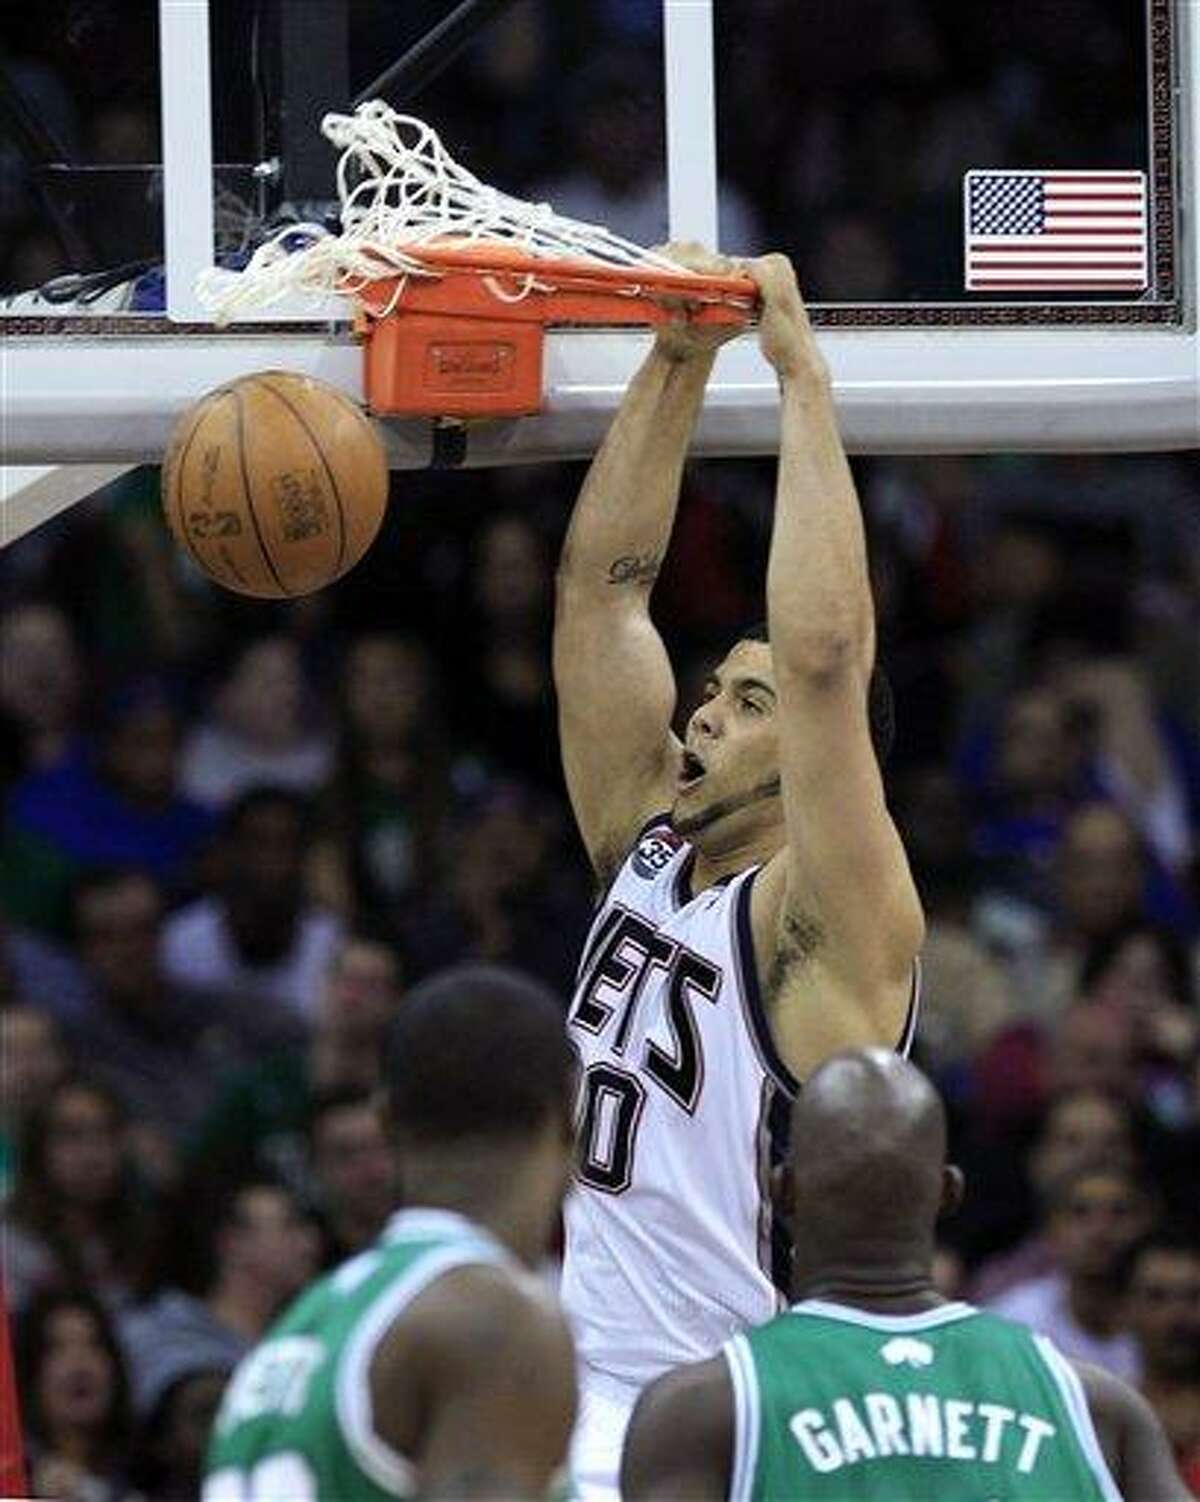 New Jersey Nets' Jordan Williams, top, dunks the ball during the second quarter of an NBA basketball game against the Boston Celtics in Newark, N.J., Saturday, April 14, 2012. (AP Photo/Mel Evans). Williams was traded Monday to the Atlanta Hawks.